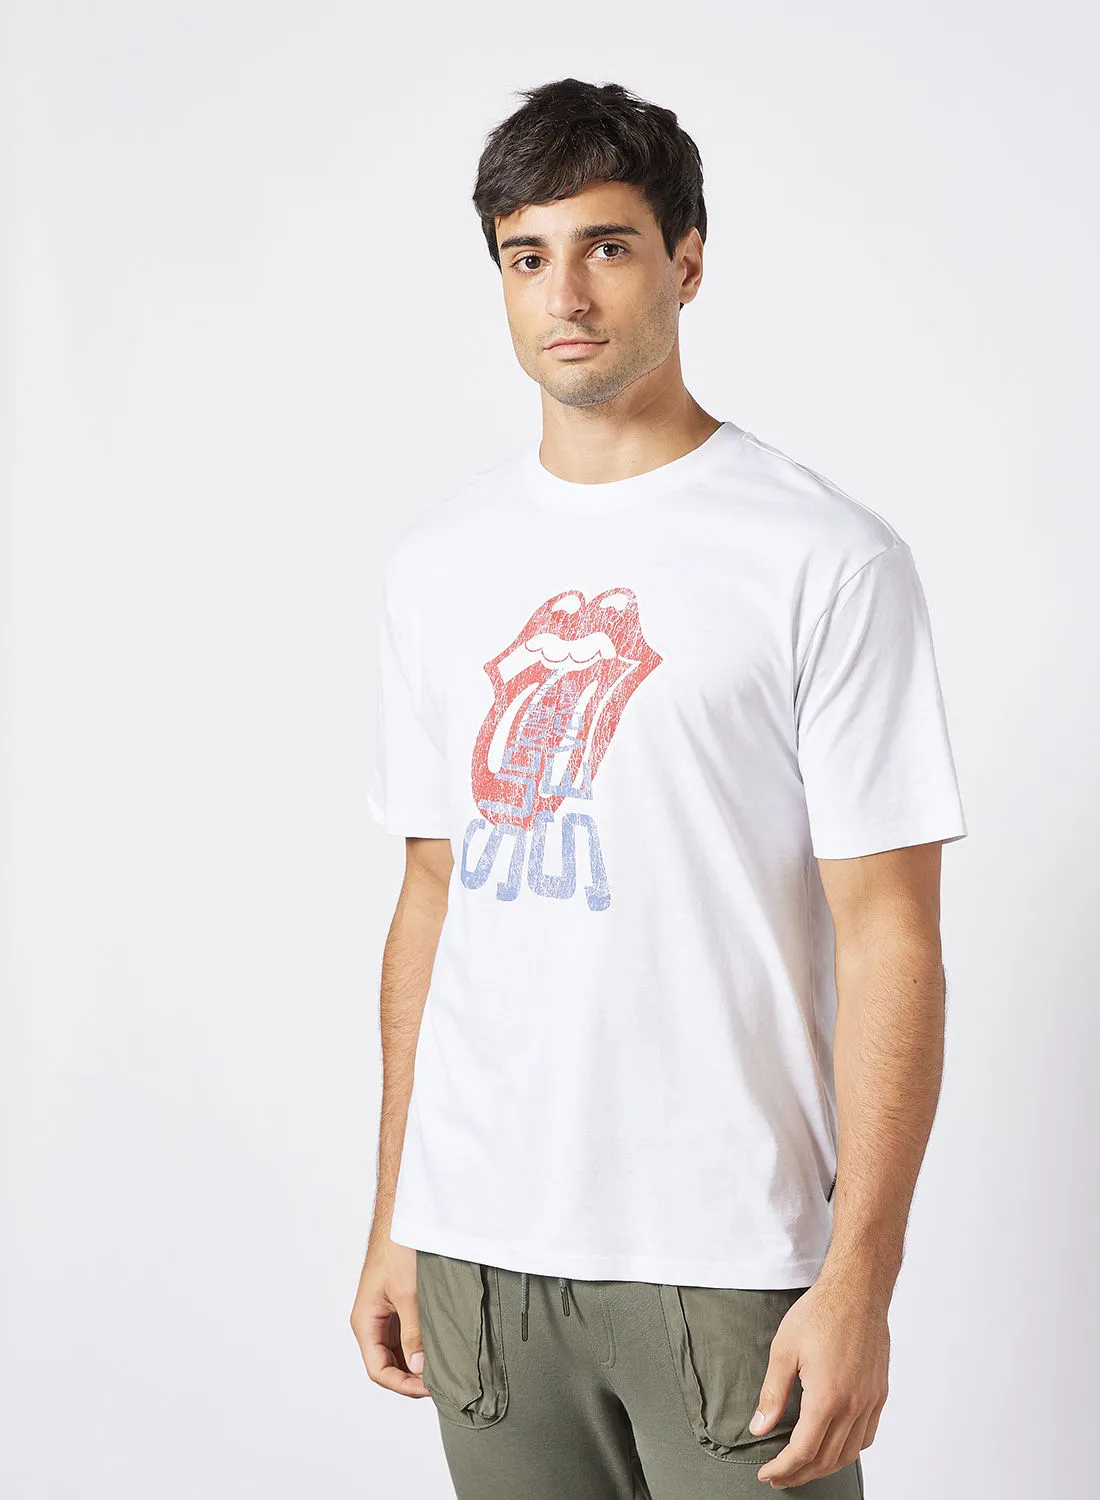 ONLY & SONS Rolling Stones Crew Neck T-Shirt أبيض